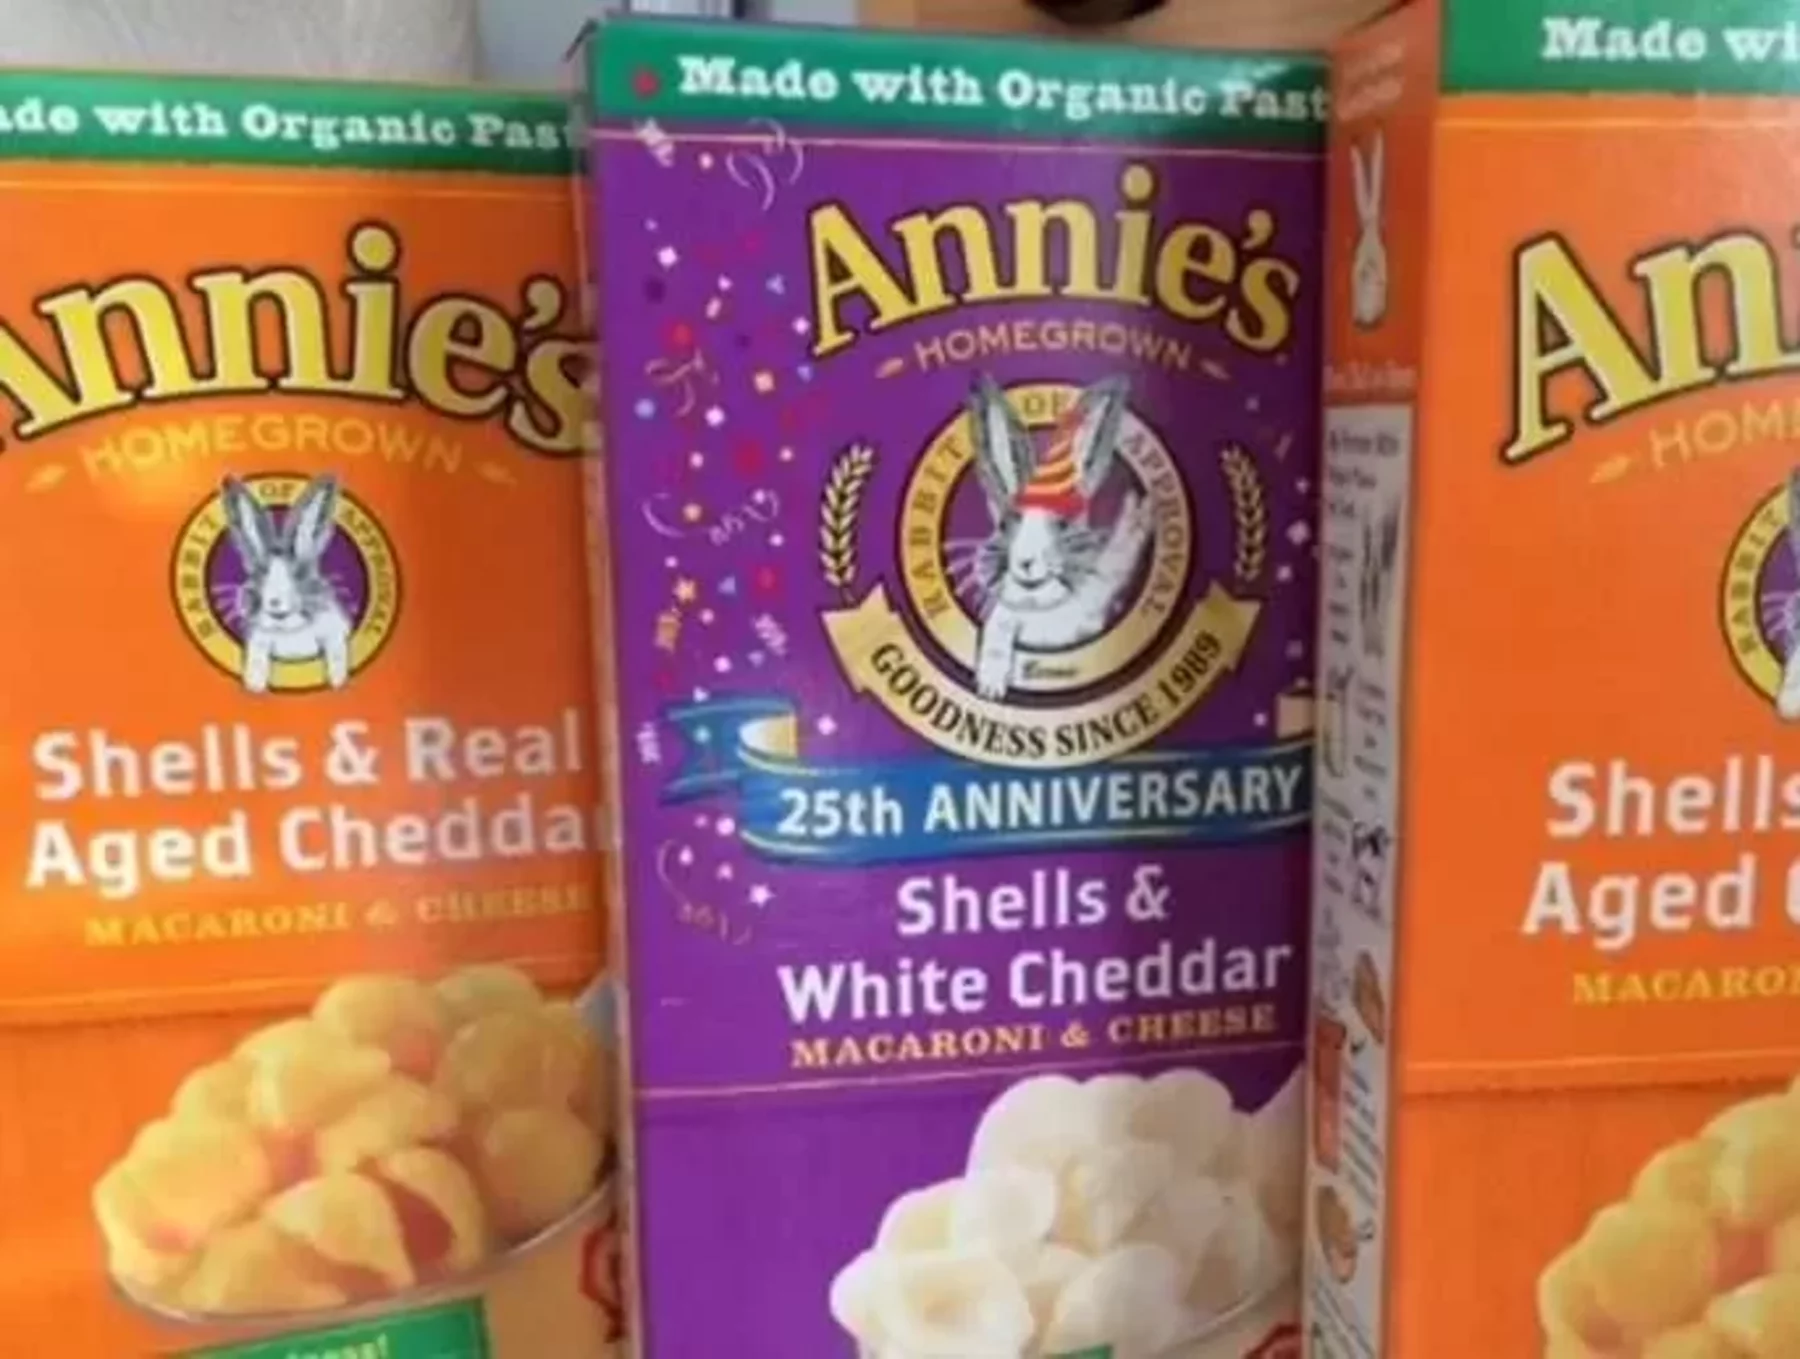 With General Mills, Annie's hopping to new heights